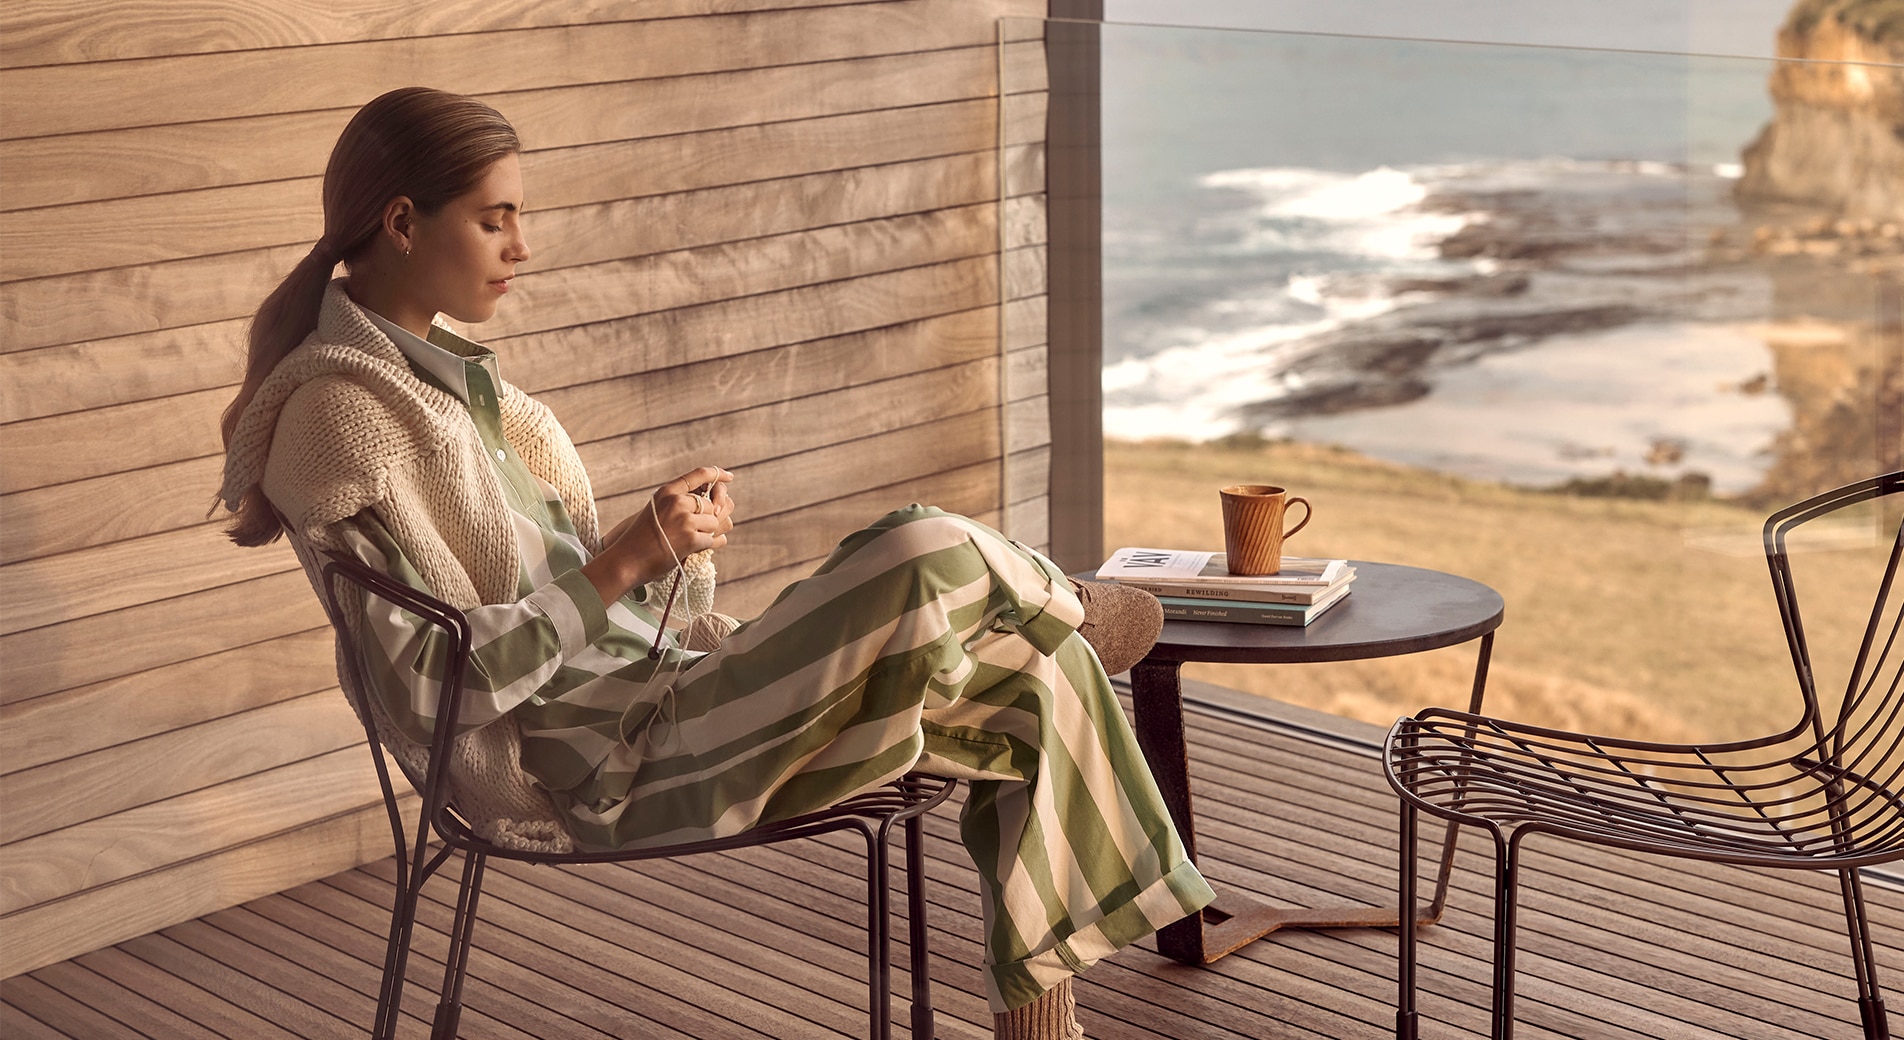 woman in striped green and white loungewear set sits on a balcony outside, with wooden wall and wooden floor, and glass railing. she has a view of grassy knoll, leading down to rocky cliff front and ocean.